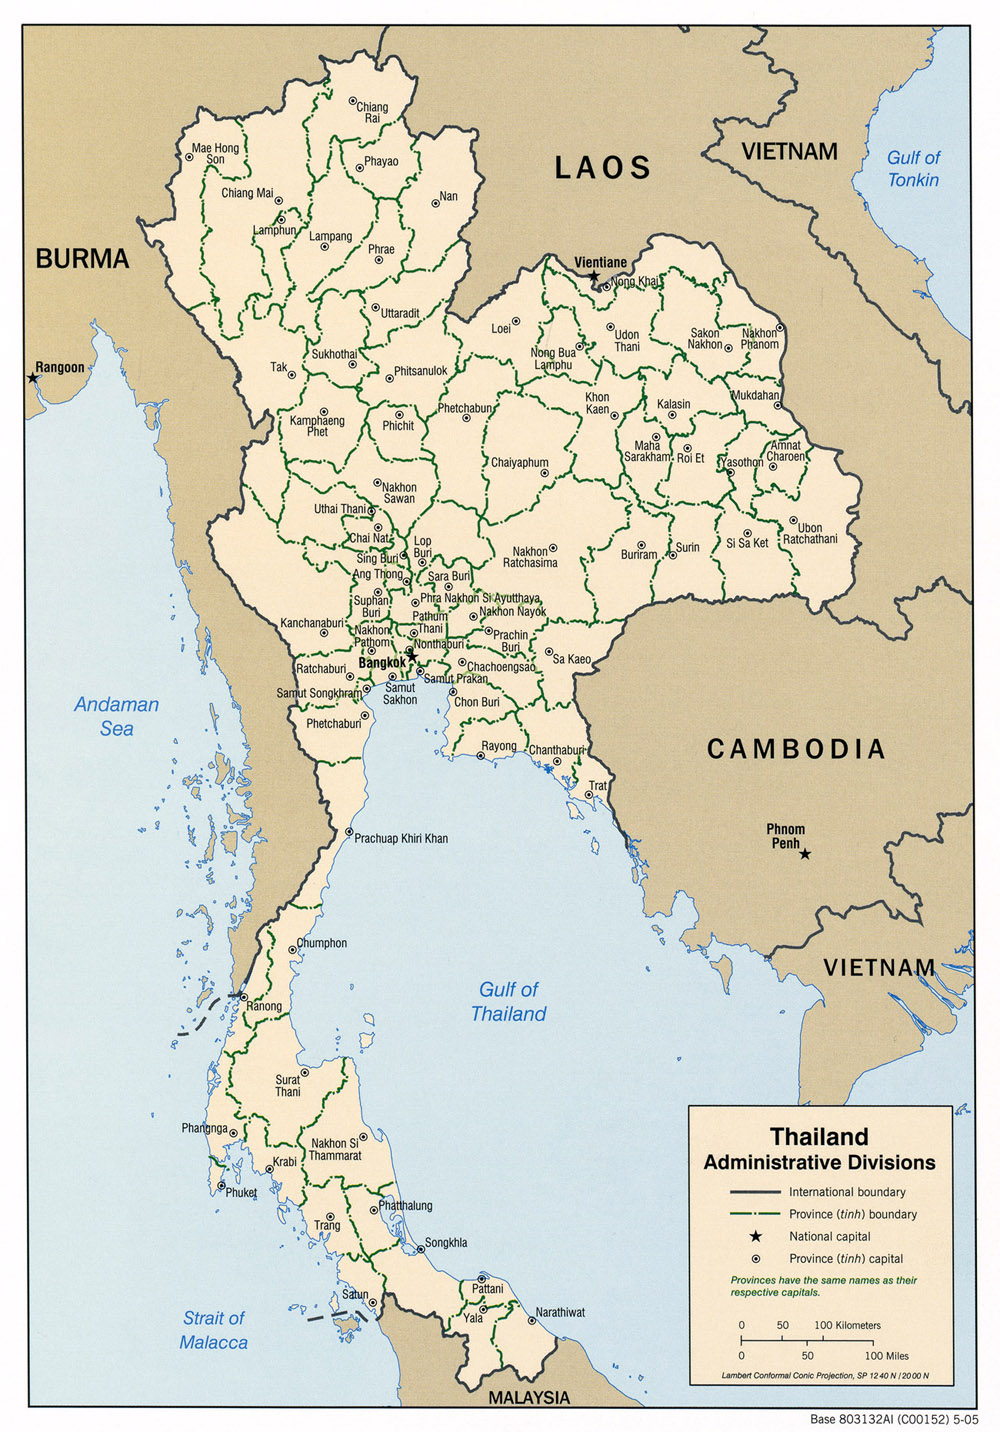 6 free maps of Thailand - ASEAN UP